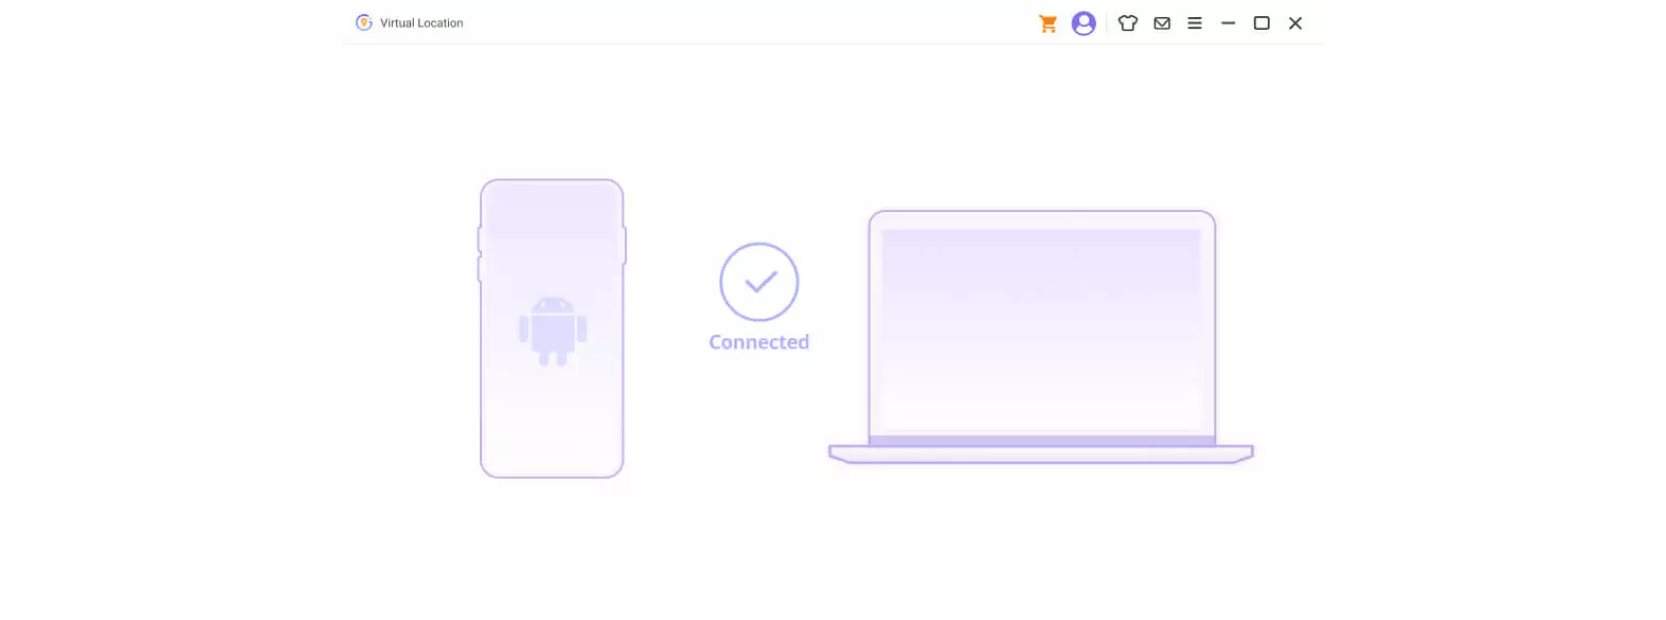 How to connect your device to computer in clevgo